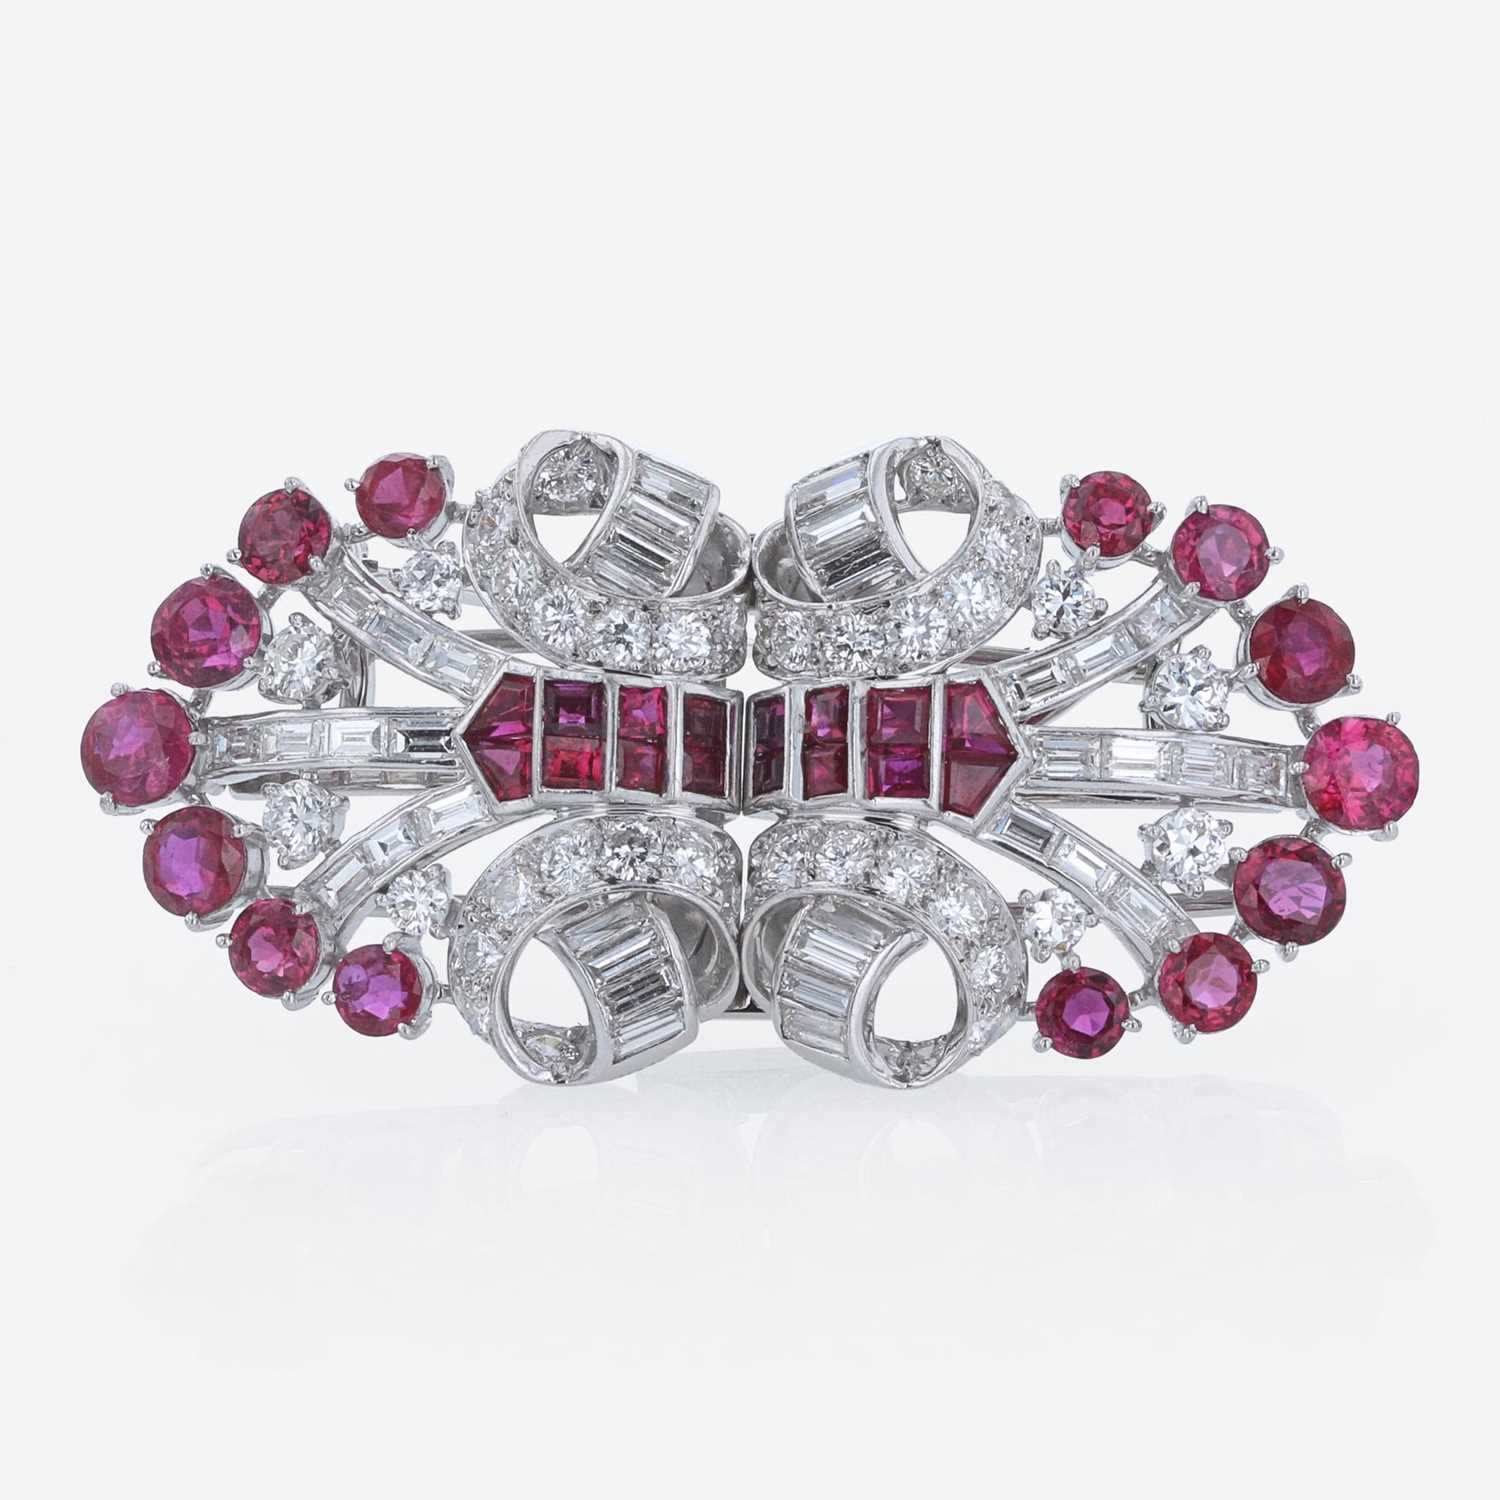 Lot 34 - An Art Deco Diamond, and Ruby Duette Double Clip Brooch